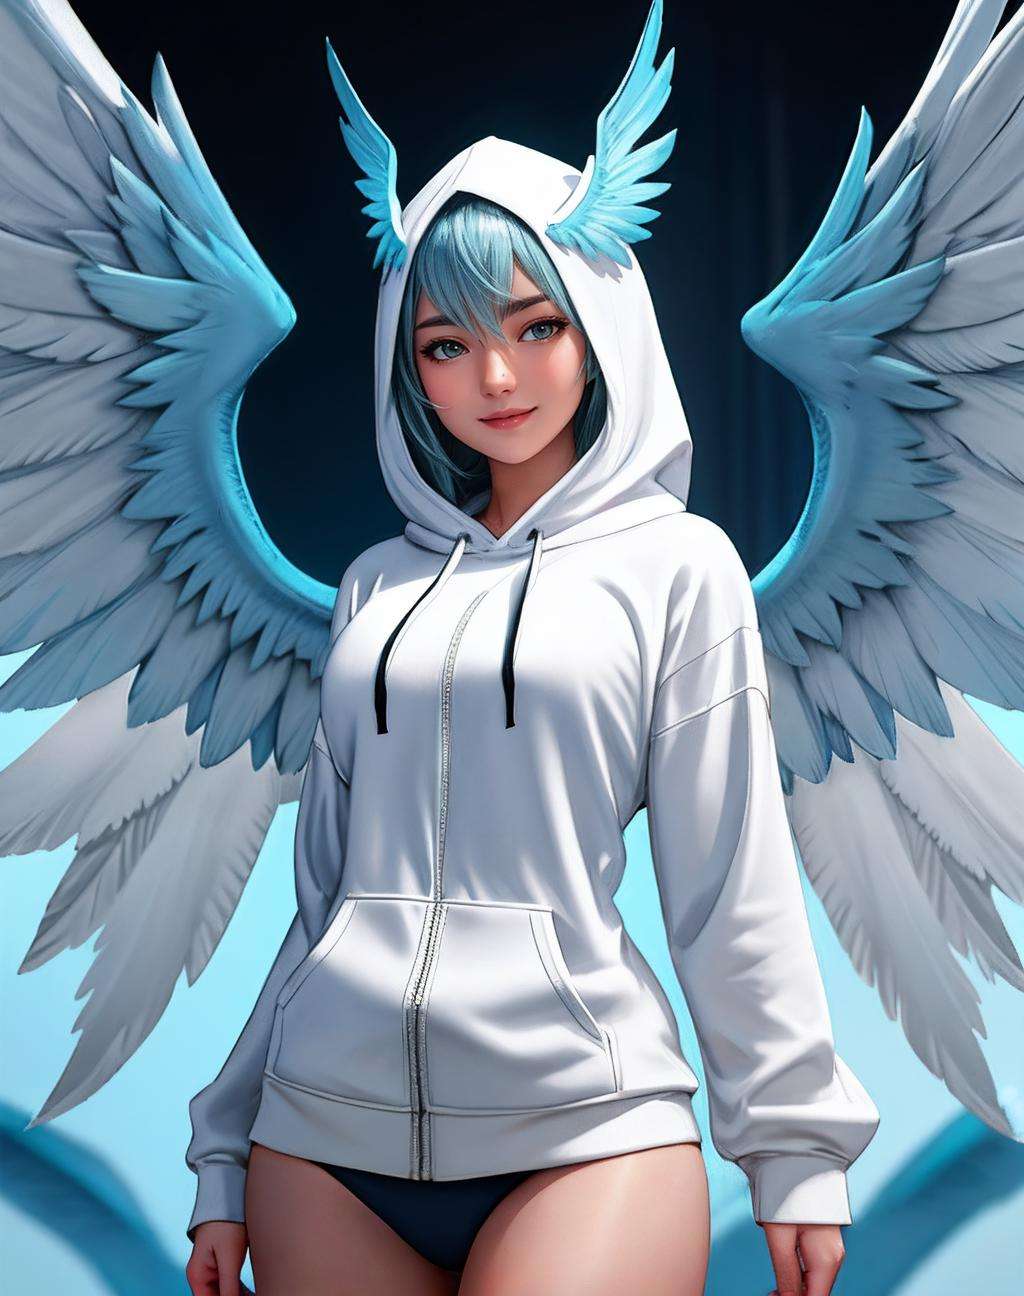 ((Masterpiece, best quality)),photography, detailed skin, realistic, photo-realistic, 8k, highly detailed, full length frame, High detail RAW color art, diffused soft lighting, shallow depth of field, sharp focus, hyperrealism, cinematic lighting,smiling,edgGaruda_hoodie, a white and blue bird_woman with wings wearing an (oversize hoodie) ,wearing edgGaruda_hoodie <lora:edgGarudaHoodies:0.775>